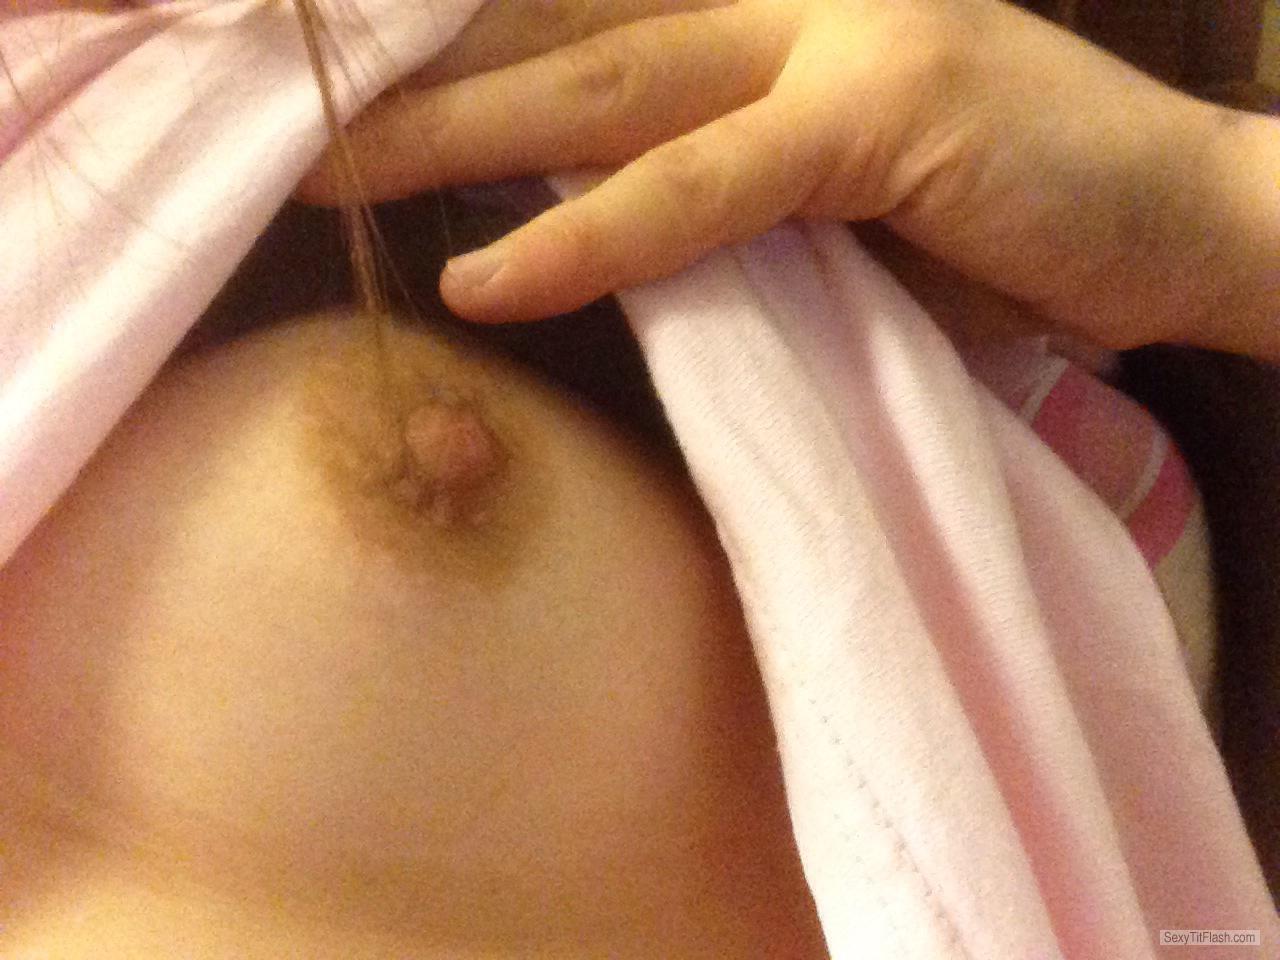 Tit Flash: My Very Small Tits (Selfie) - Candy from New Zealand